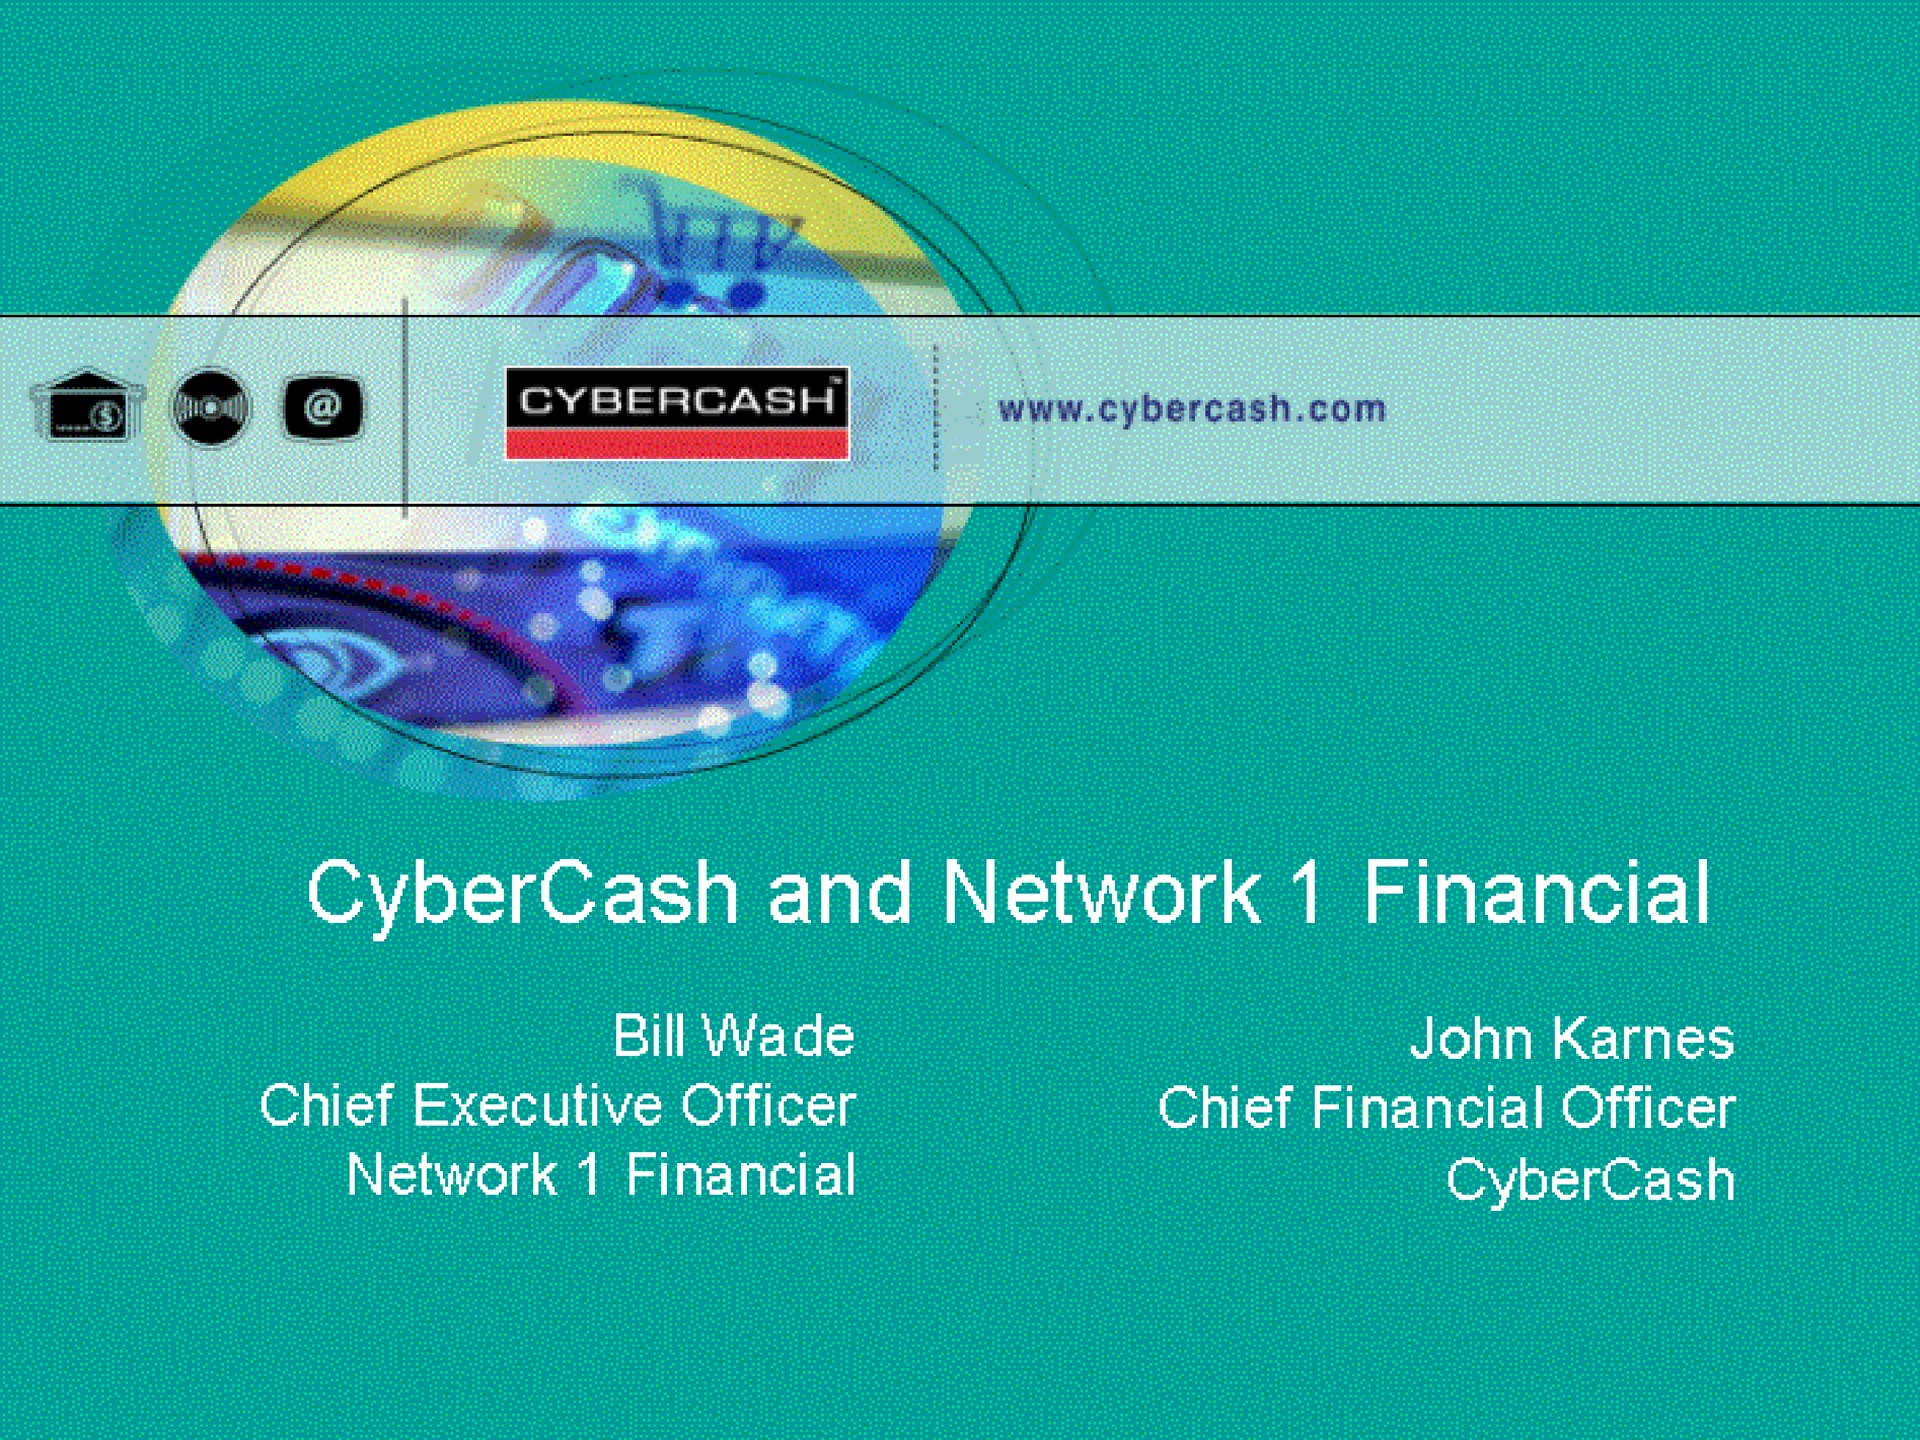 and network financial | CyberCash